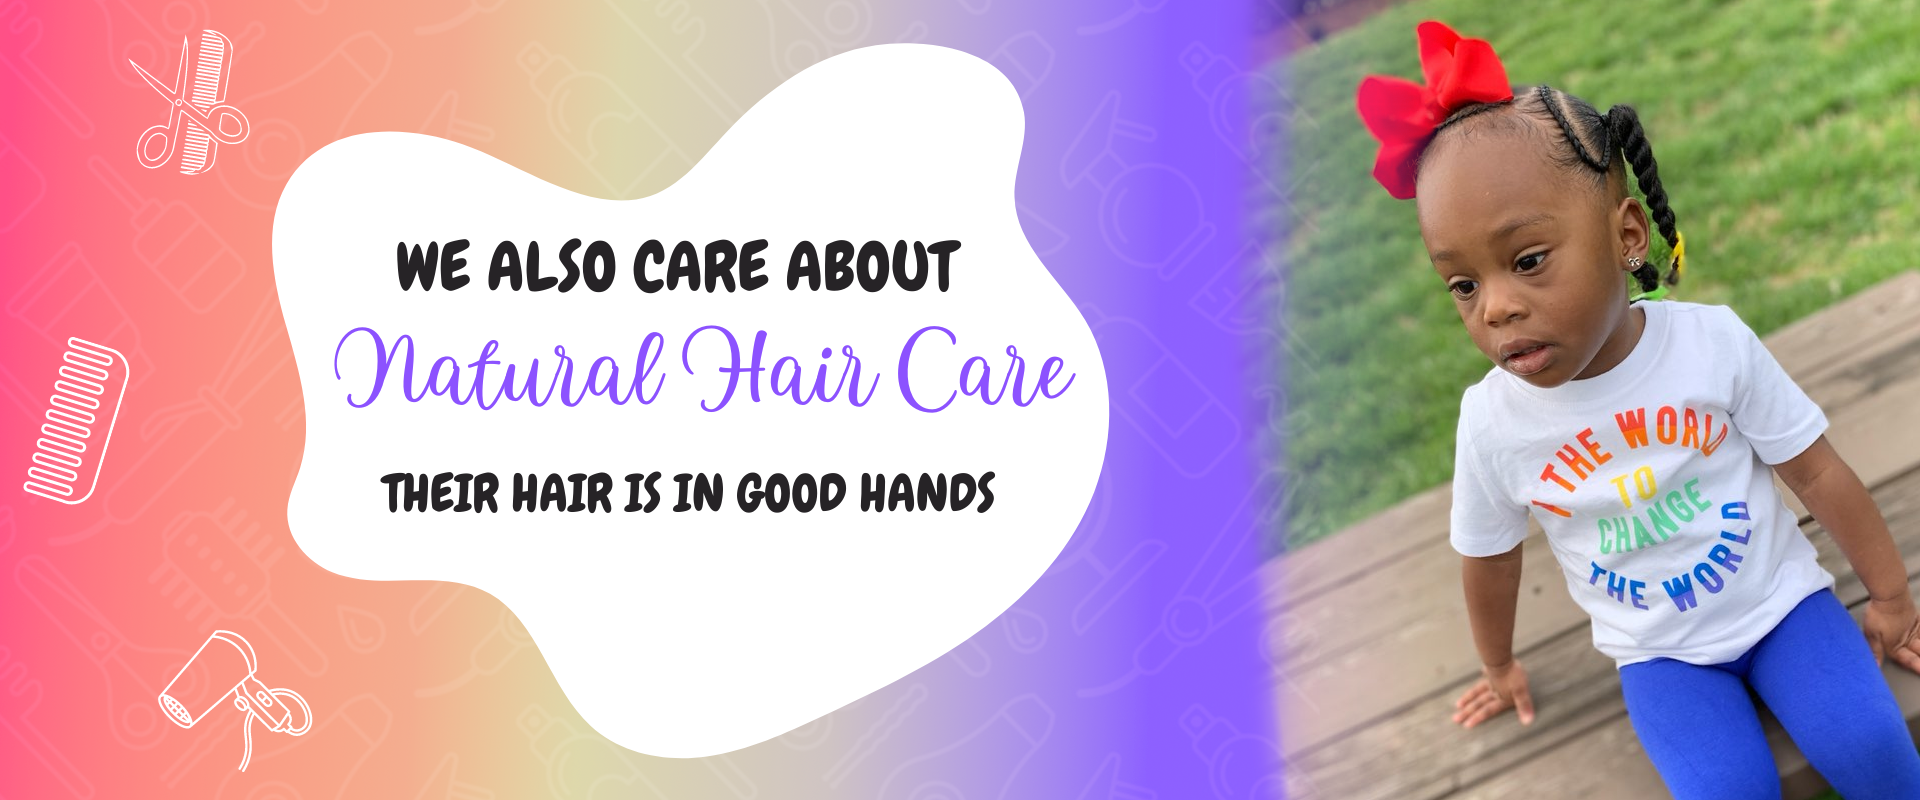 we also care about natural hair care. Their hair is in good hands